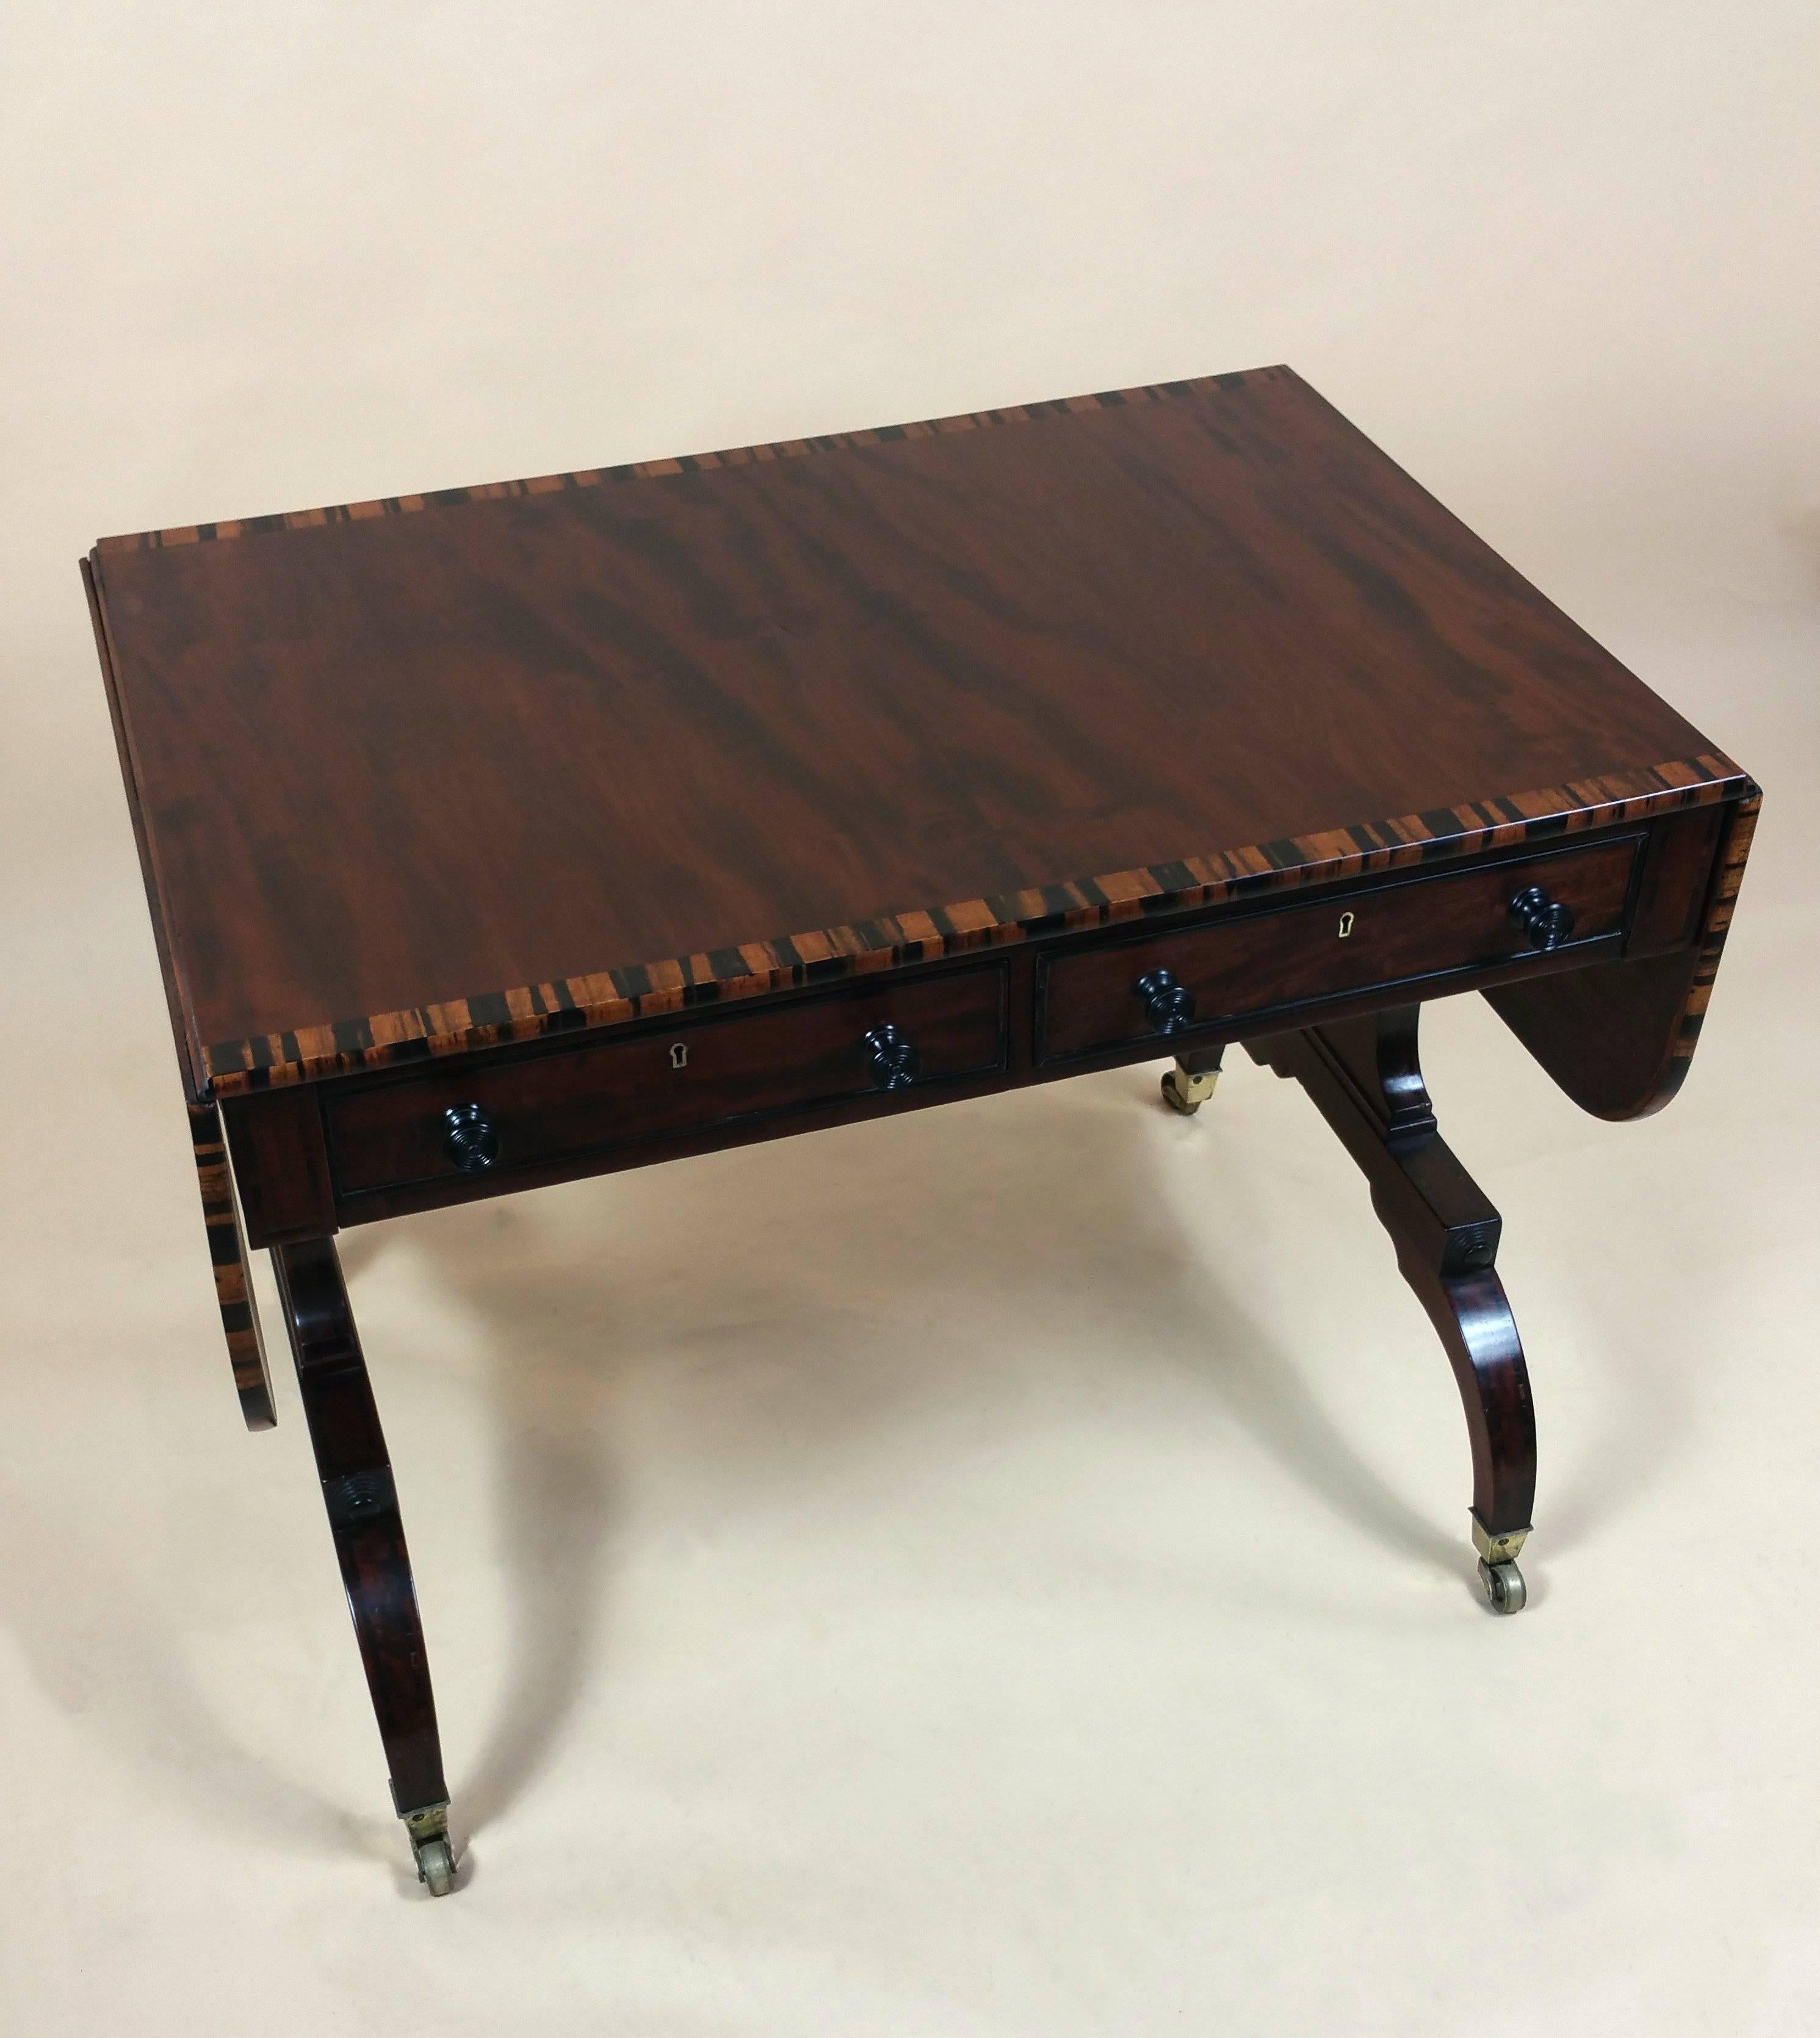 This lovely and fine quality Regency mahogany sofa table features a wide coromandel cross banded and inlaid border with the original ebony handles and turned decoration. The table has two top drawers and stands on original brass feet. It measures 59